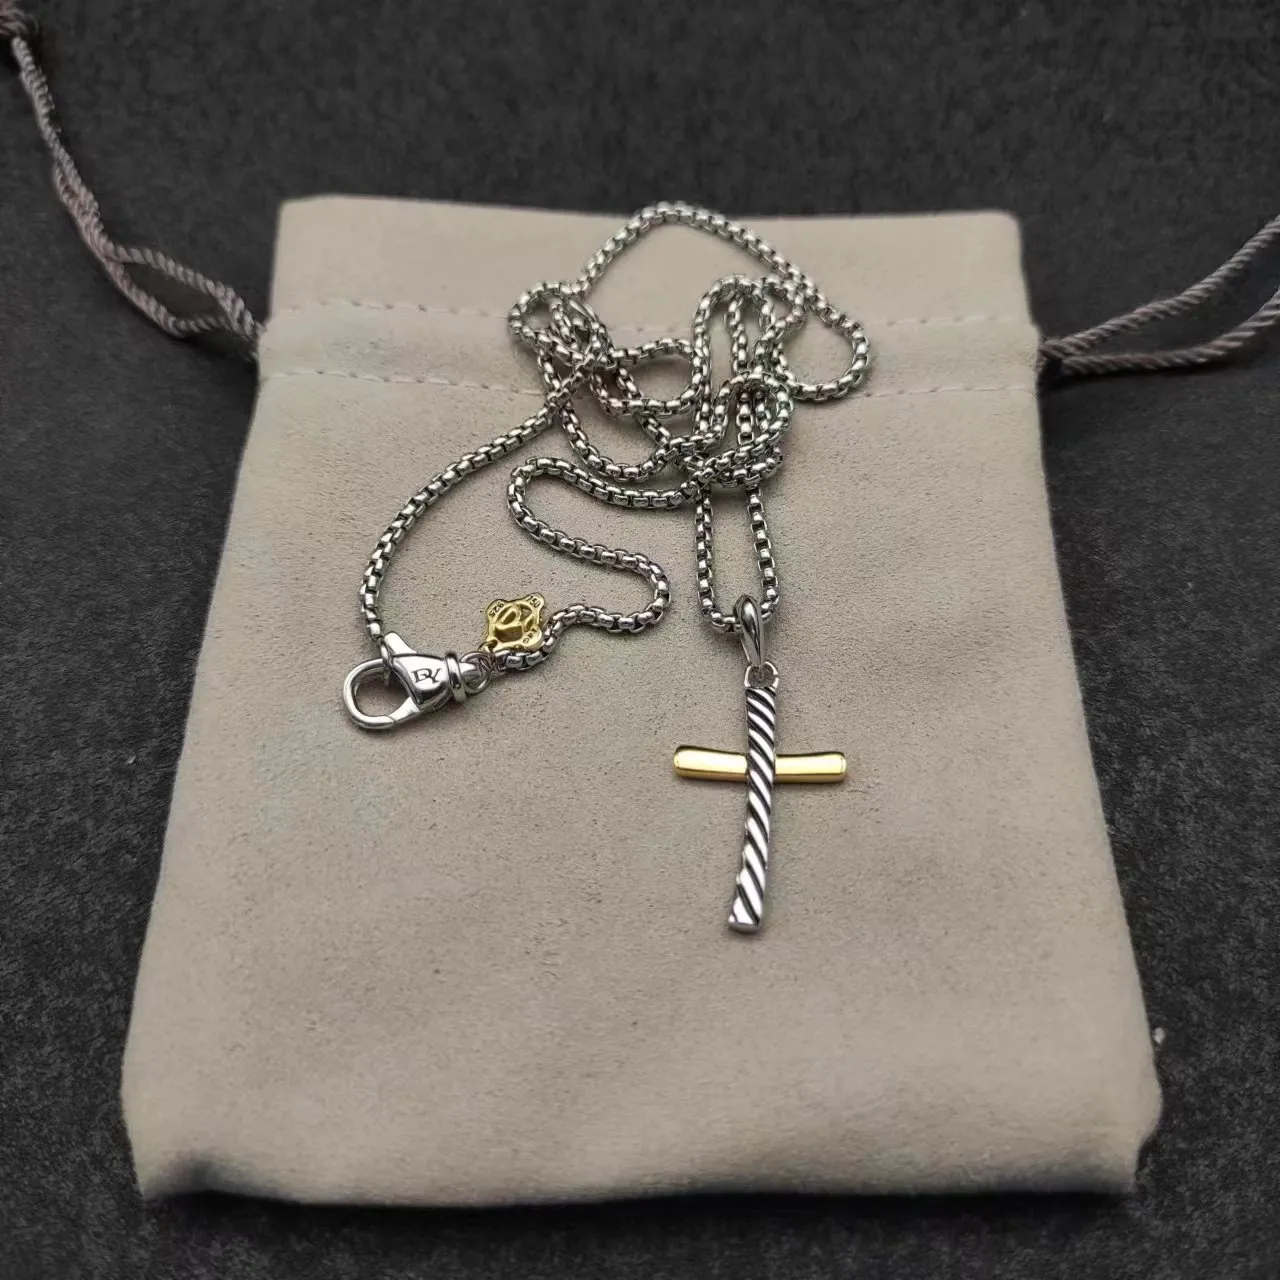 Classic Men's Gold and Silver Square Diamond Necklace Dy 20 Style Brand Designer Vintage Twisted Cross Women's Pendant Necklace Length 50cm Gift Jewelry with Box